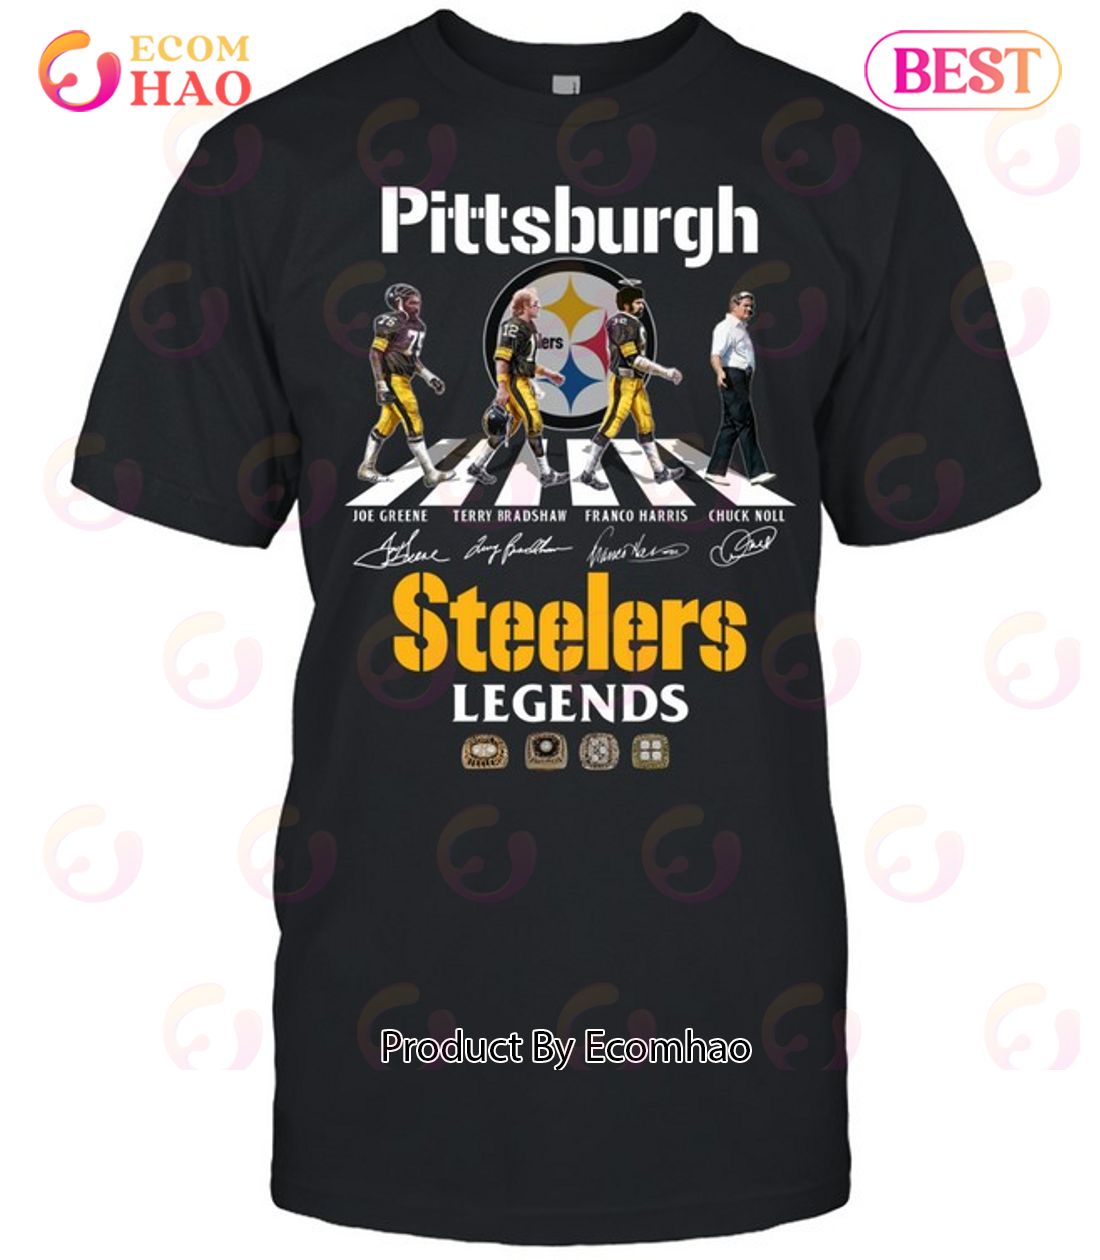 Pittsburgh Steelers Legends Special Edition Unisex T-Shirt